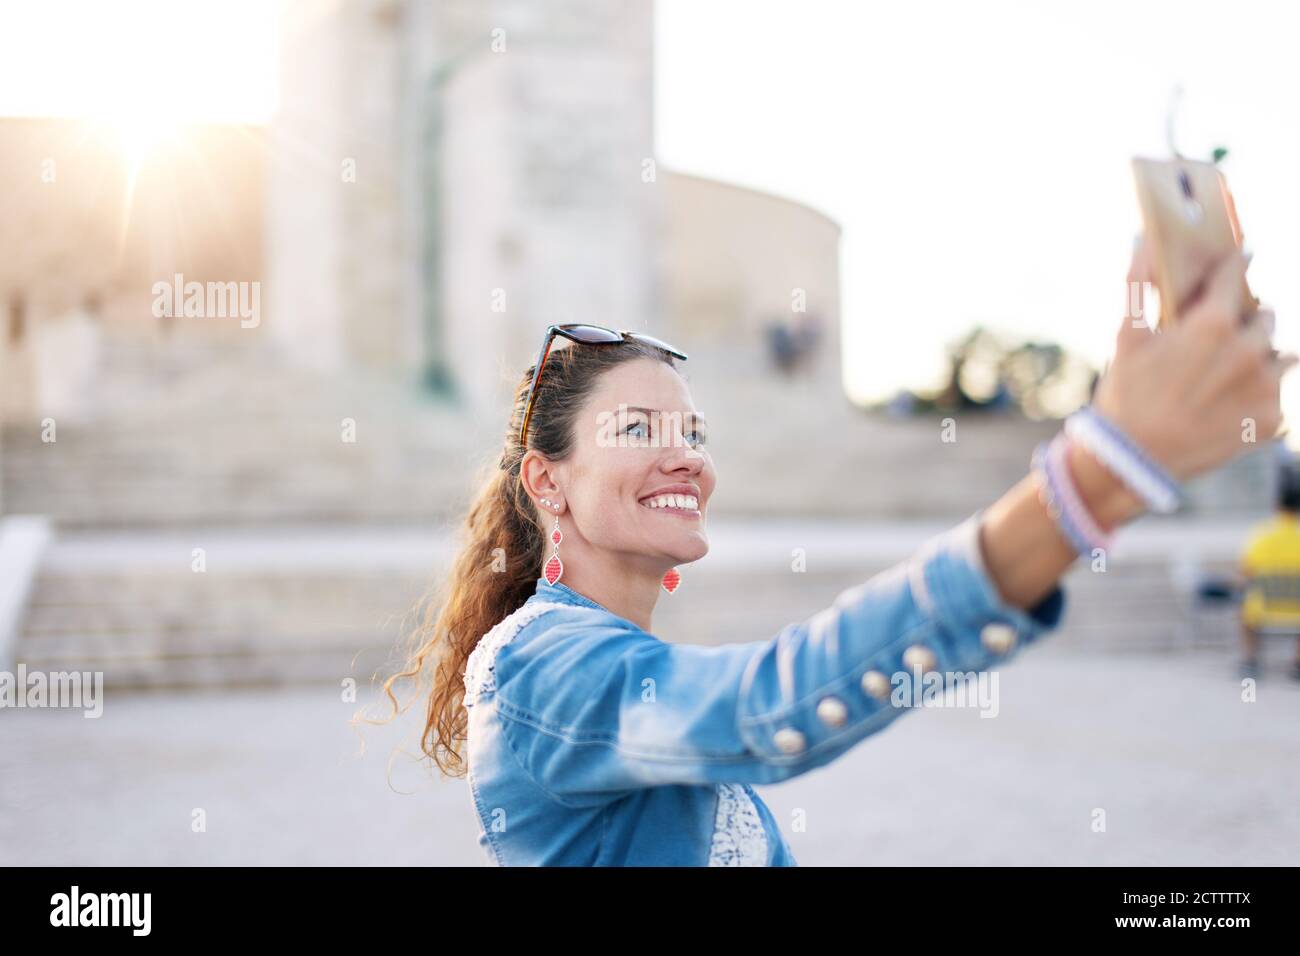 Young urban woman taking selfie at famous place in city Stock Photo